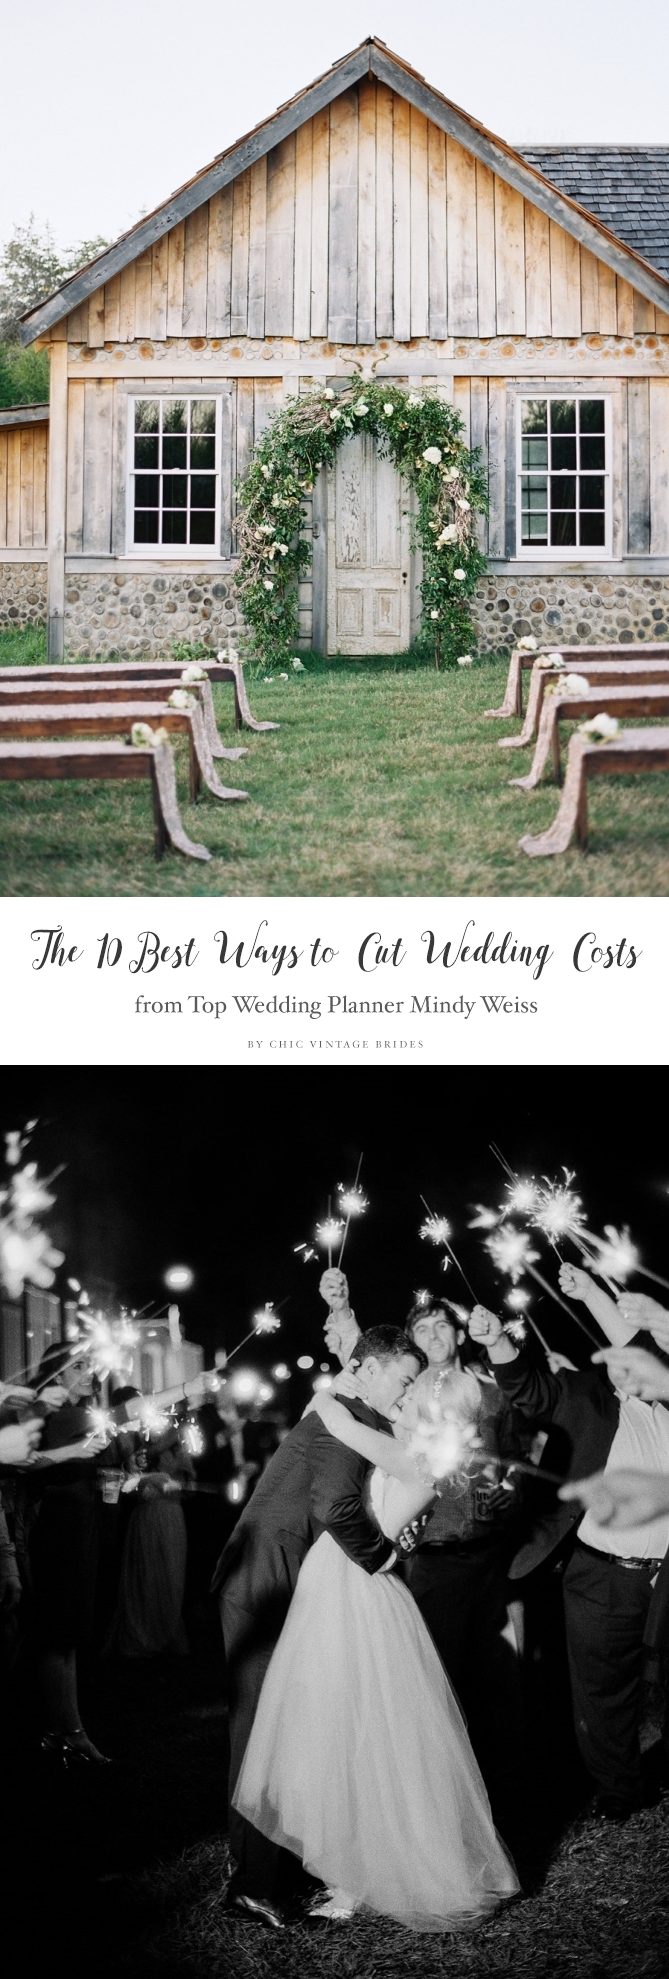 The 10 Best Ways to Cut Wedding Costs from World Famous Wedding Planner Mindy Weiss